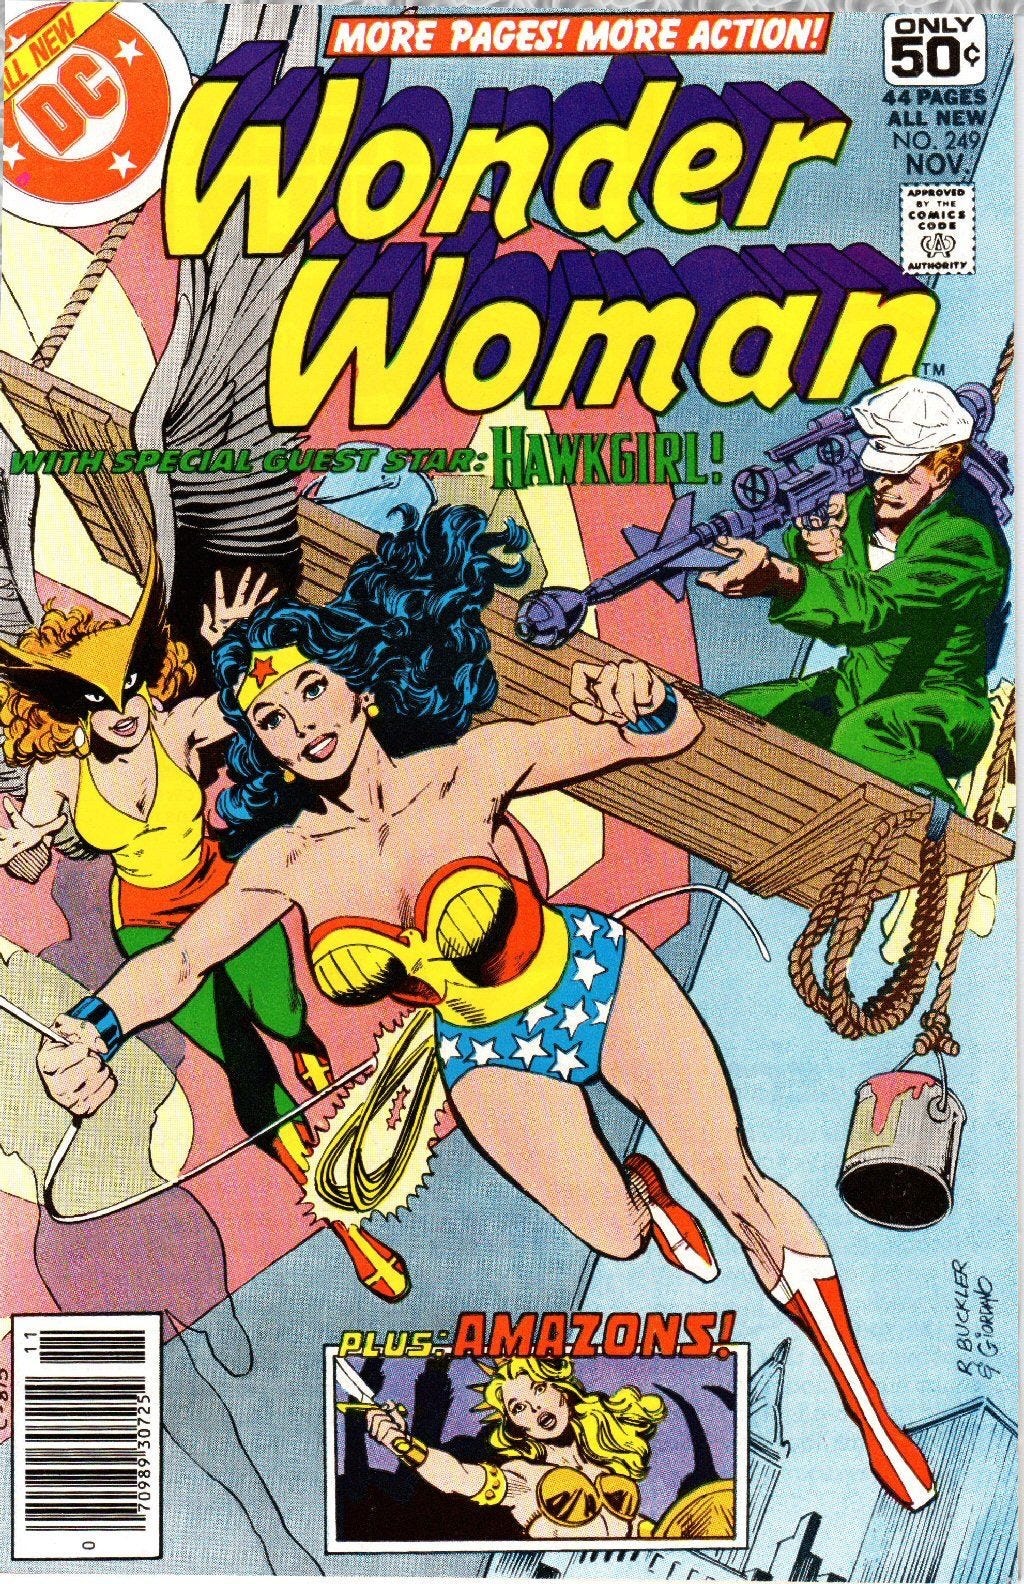 Pin by Mark Stratton on Comic & Pulpy Covers | Wonder woman comic, Comic book characters, Dc ...